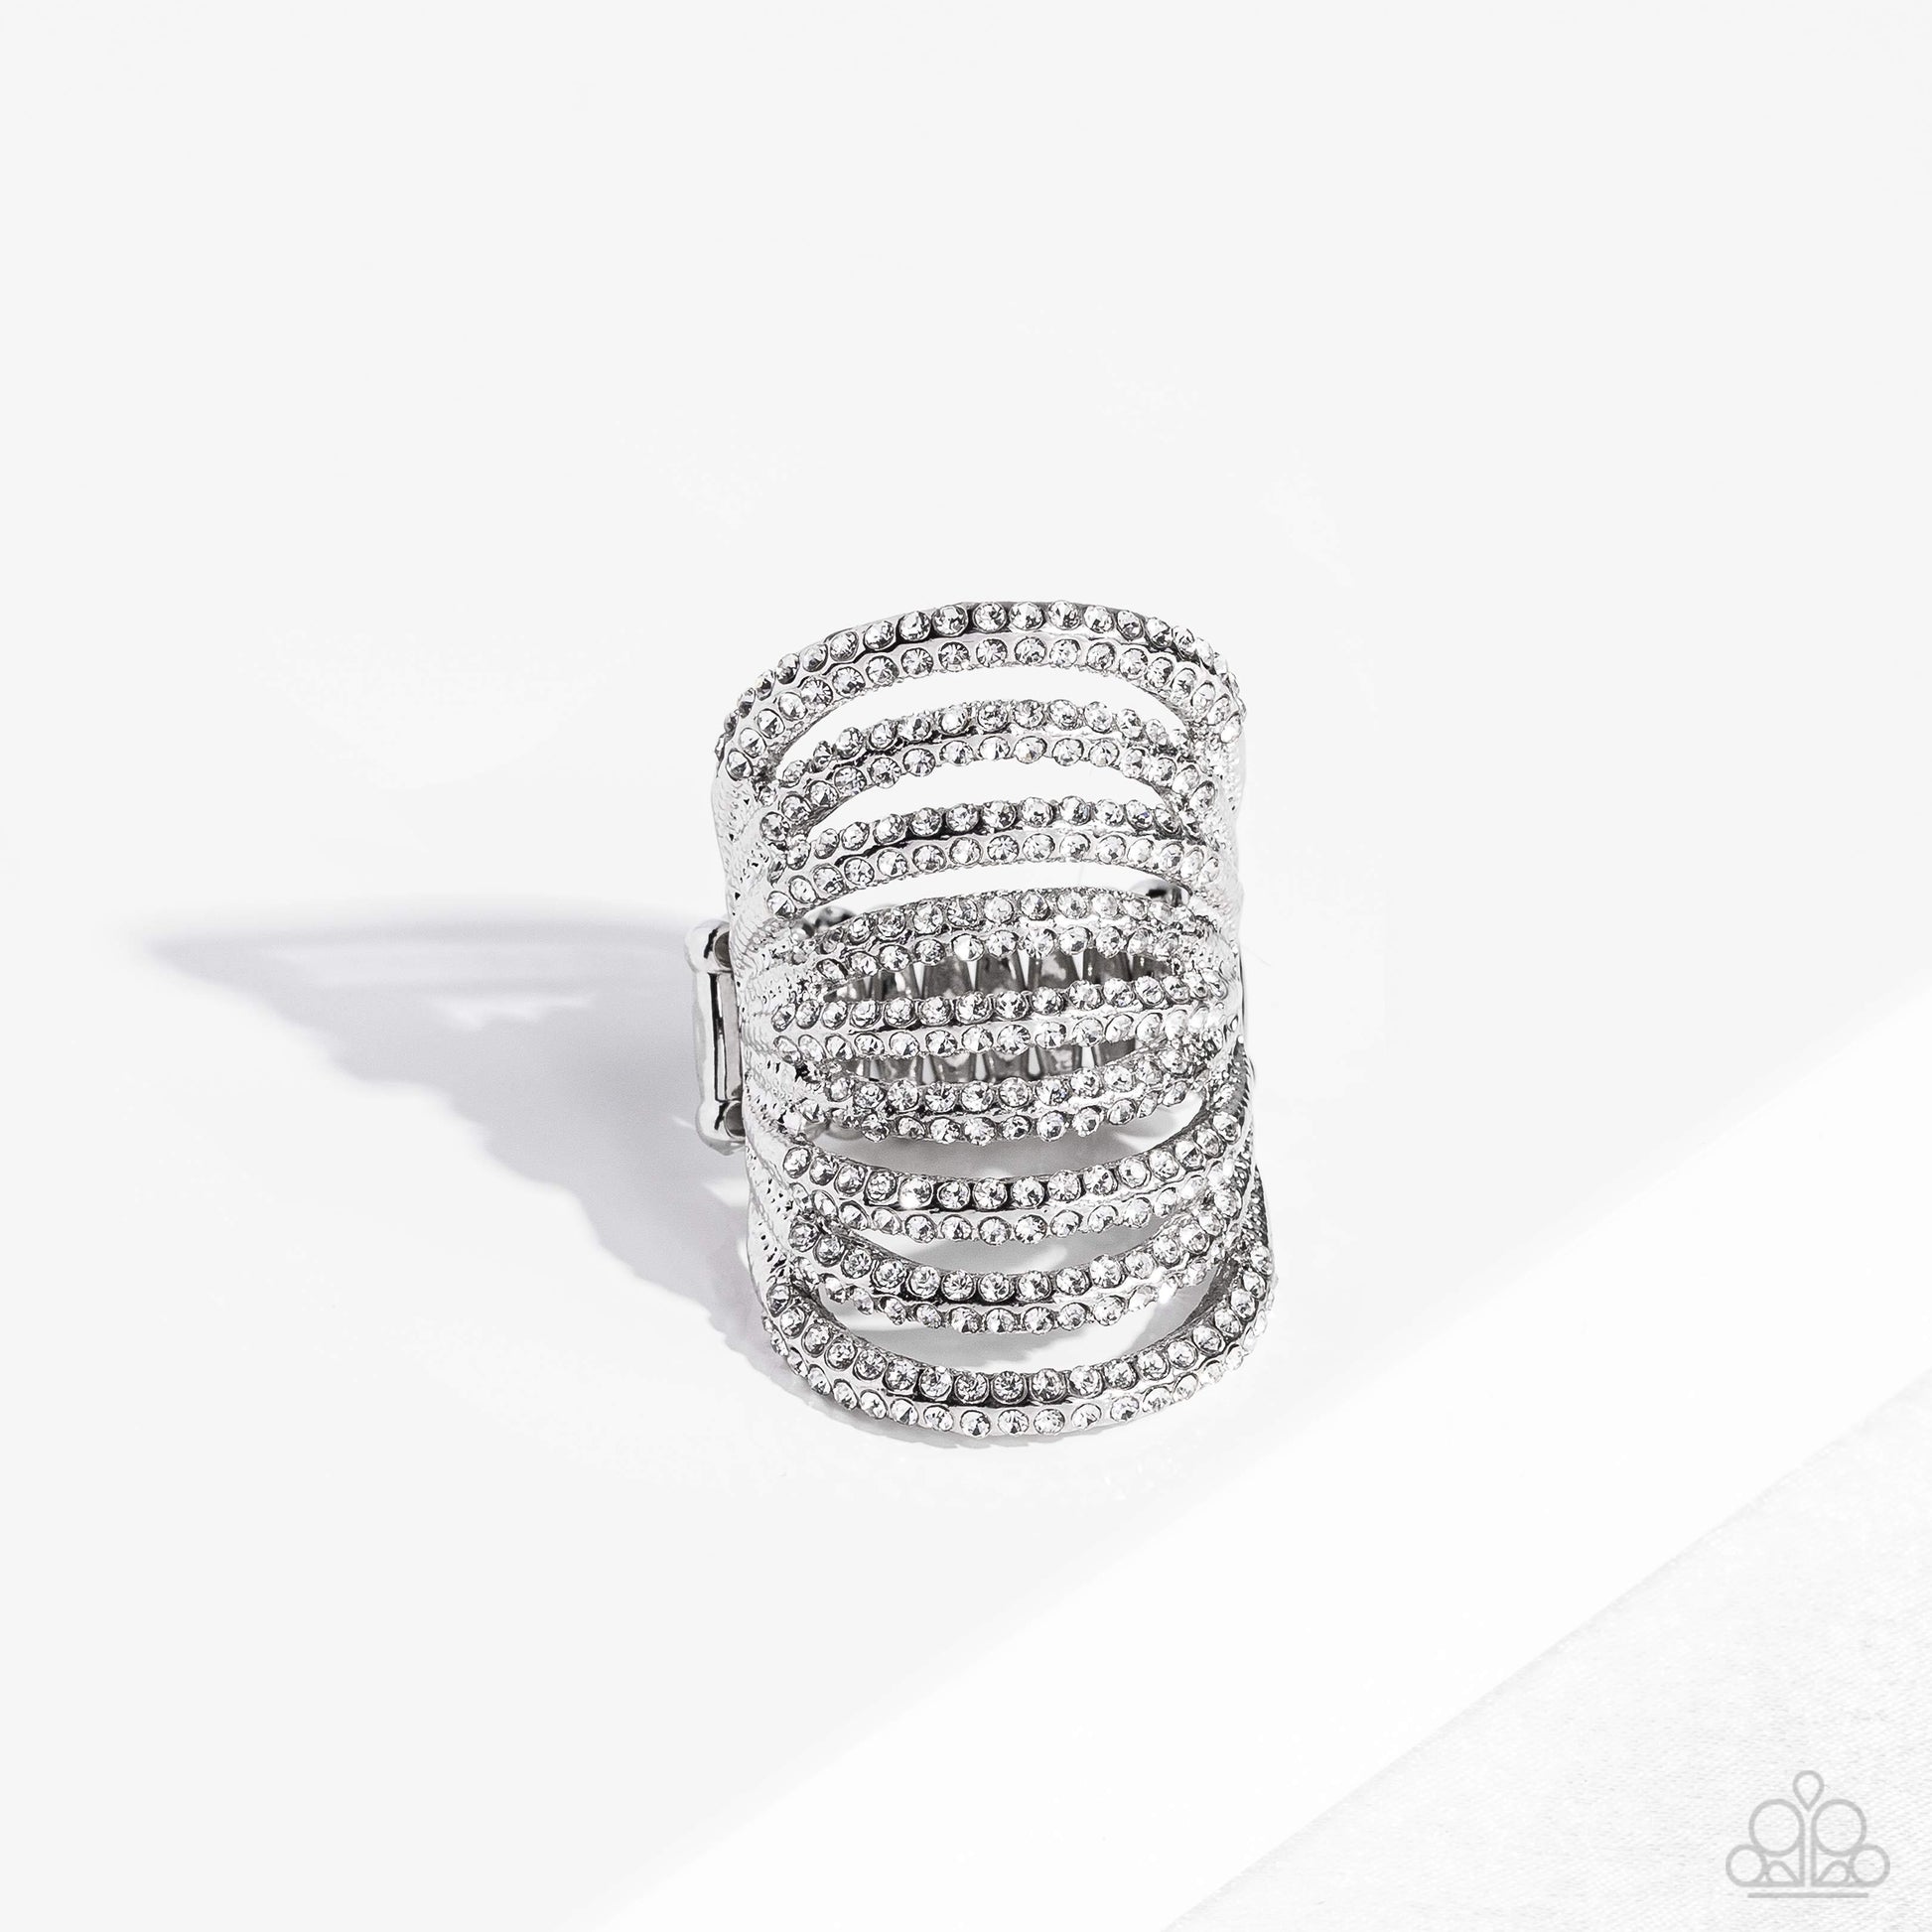 Paparazzi Accessories Rippling Rarity - White An elongated silver frame, lined with dainty white rhinestones, creates the illusion of endless sparkle as it stacks up the finger. Encrusted in two rows across each silver band as it arcs across the finger, t